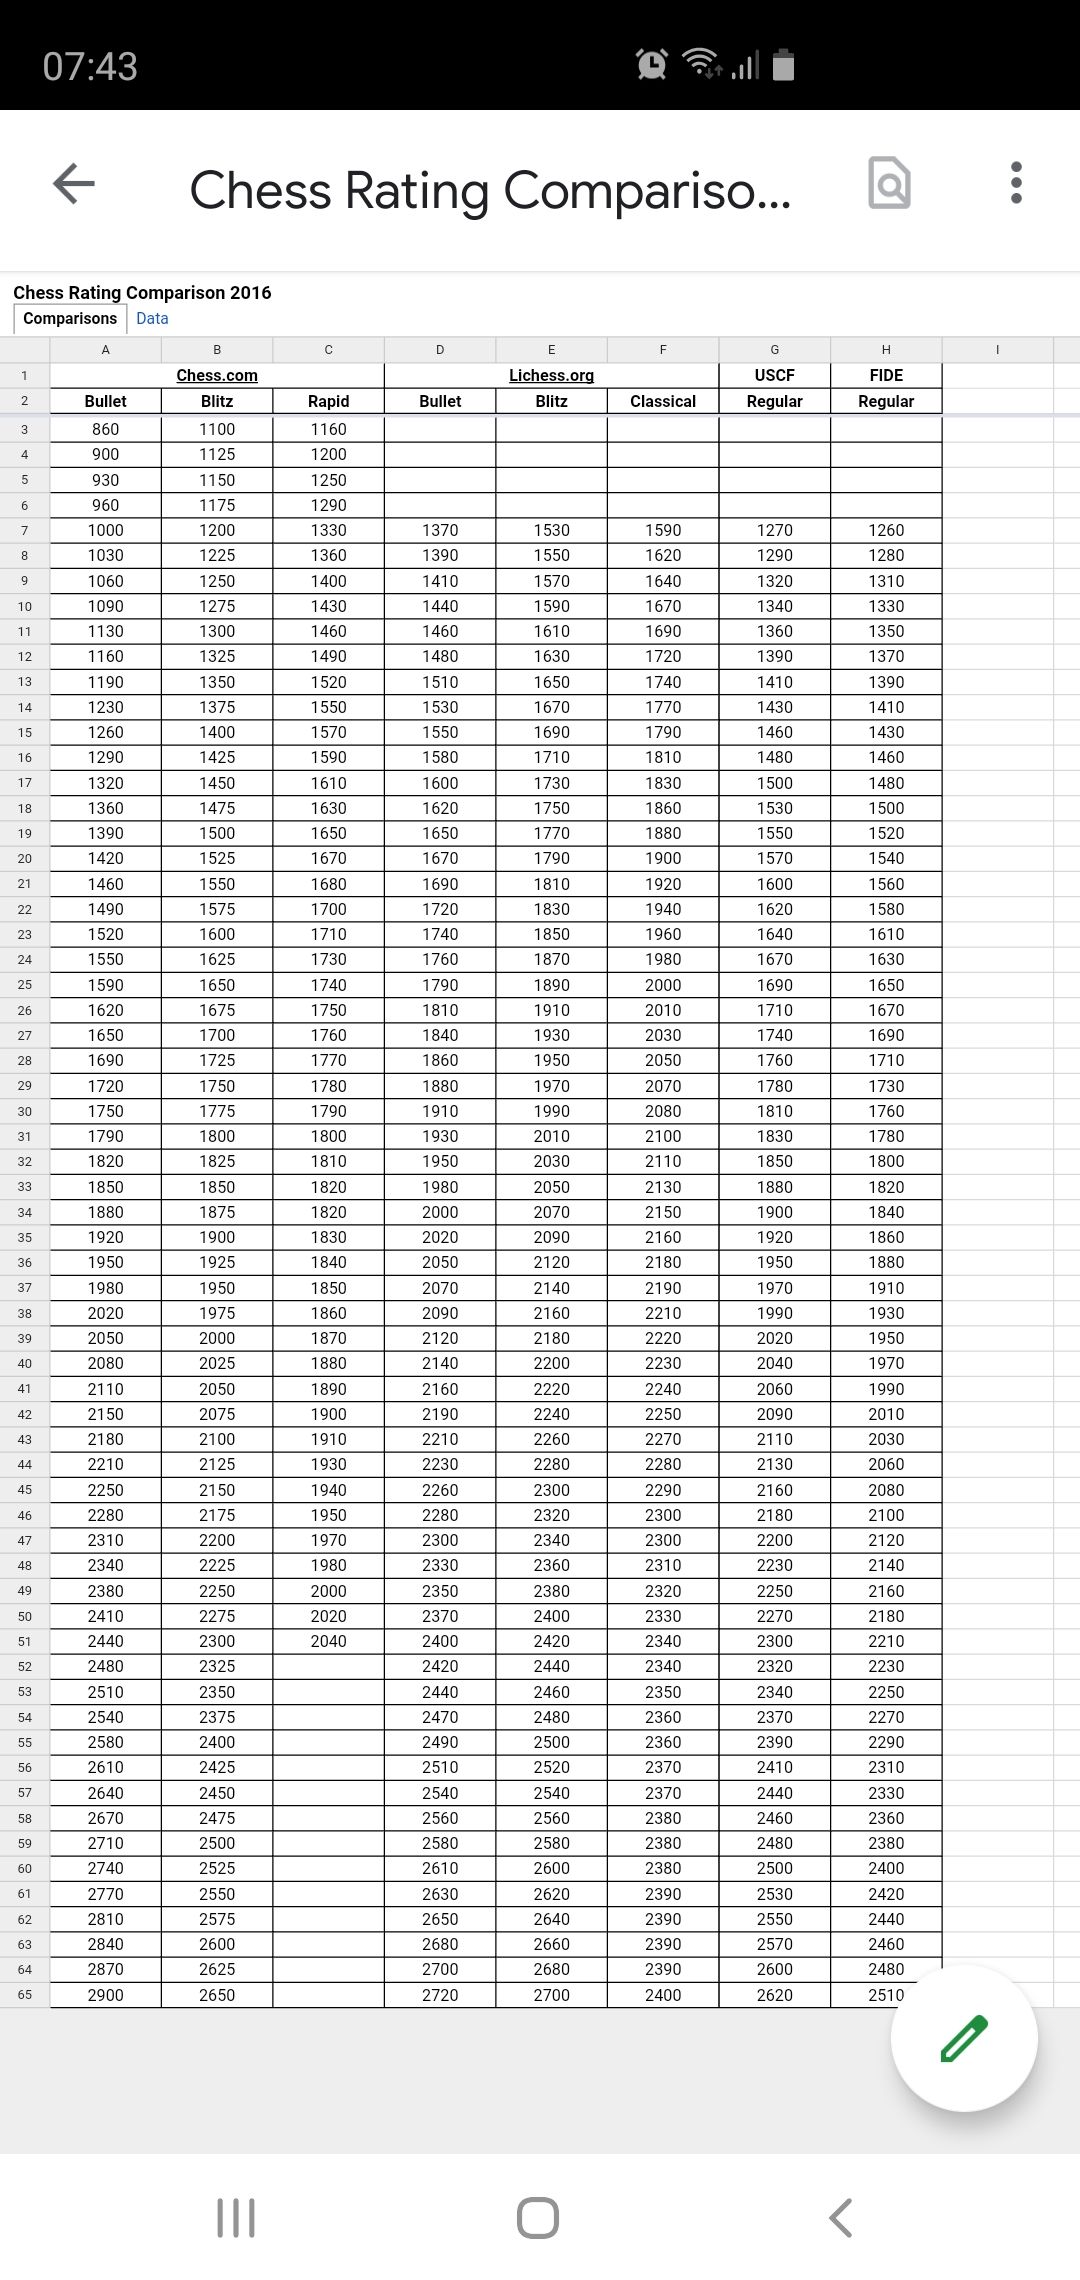 Daily Chess Ratings And Daily960 Ratings Adjusted 